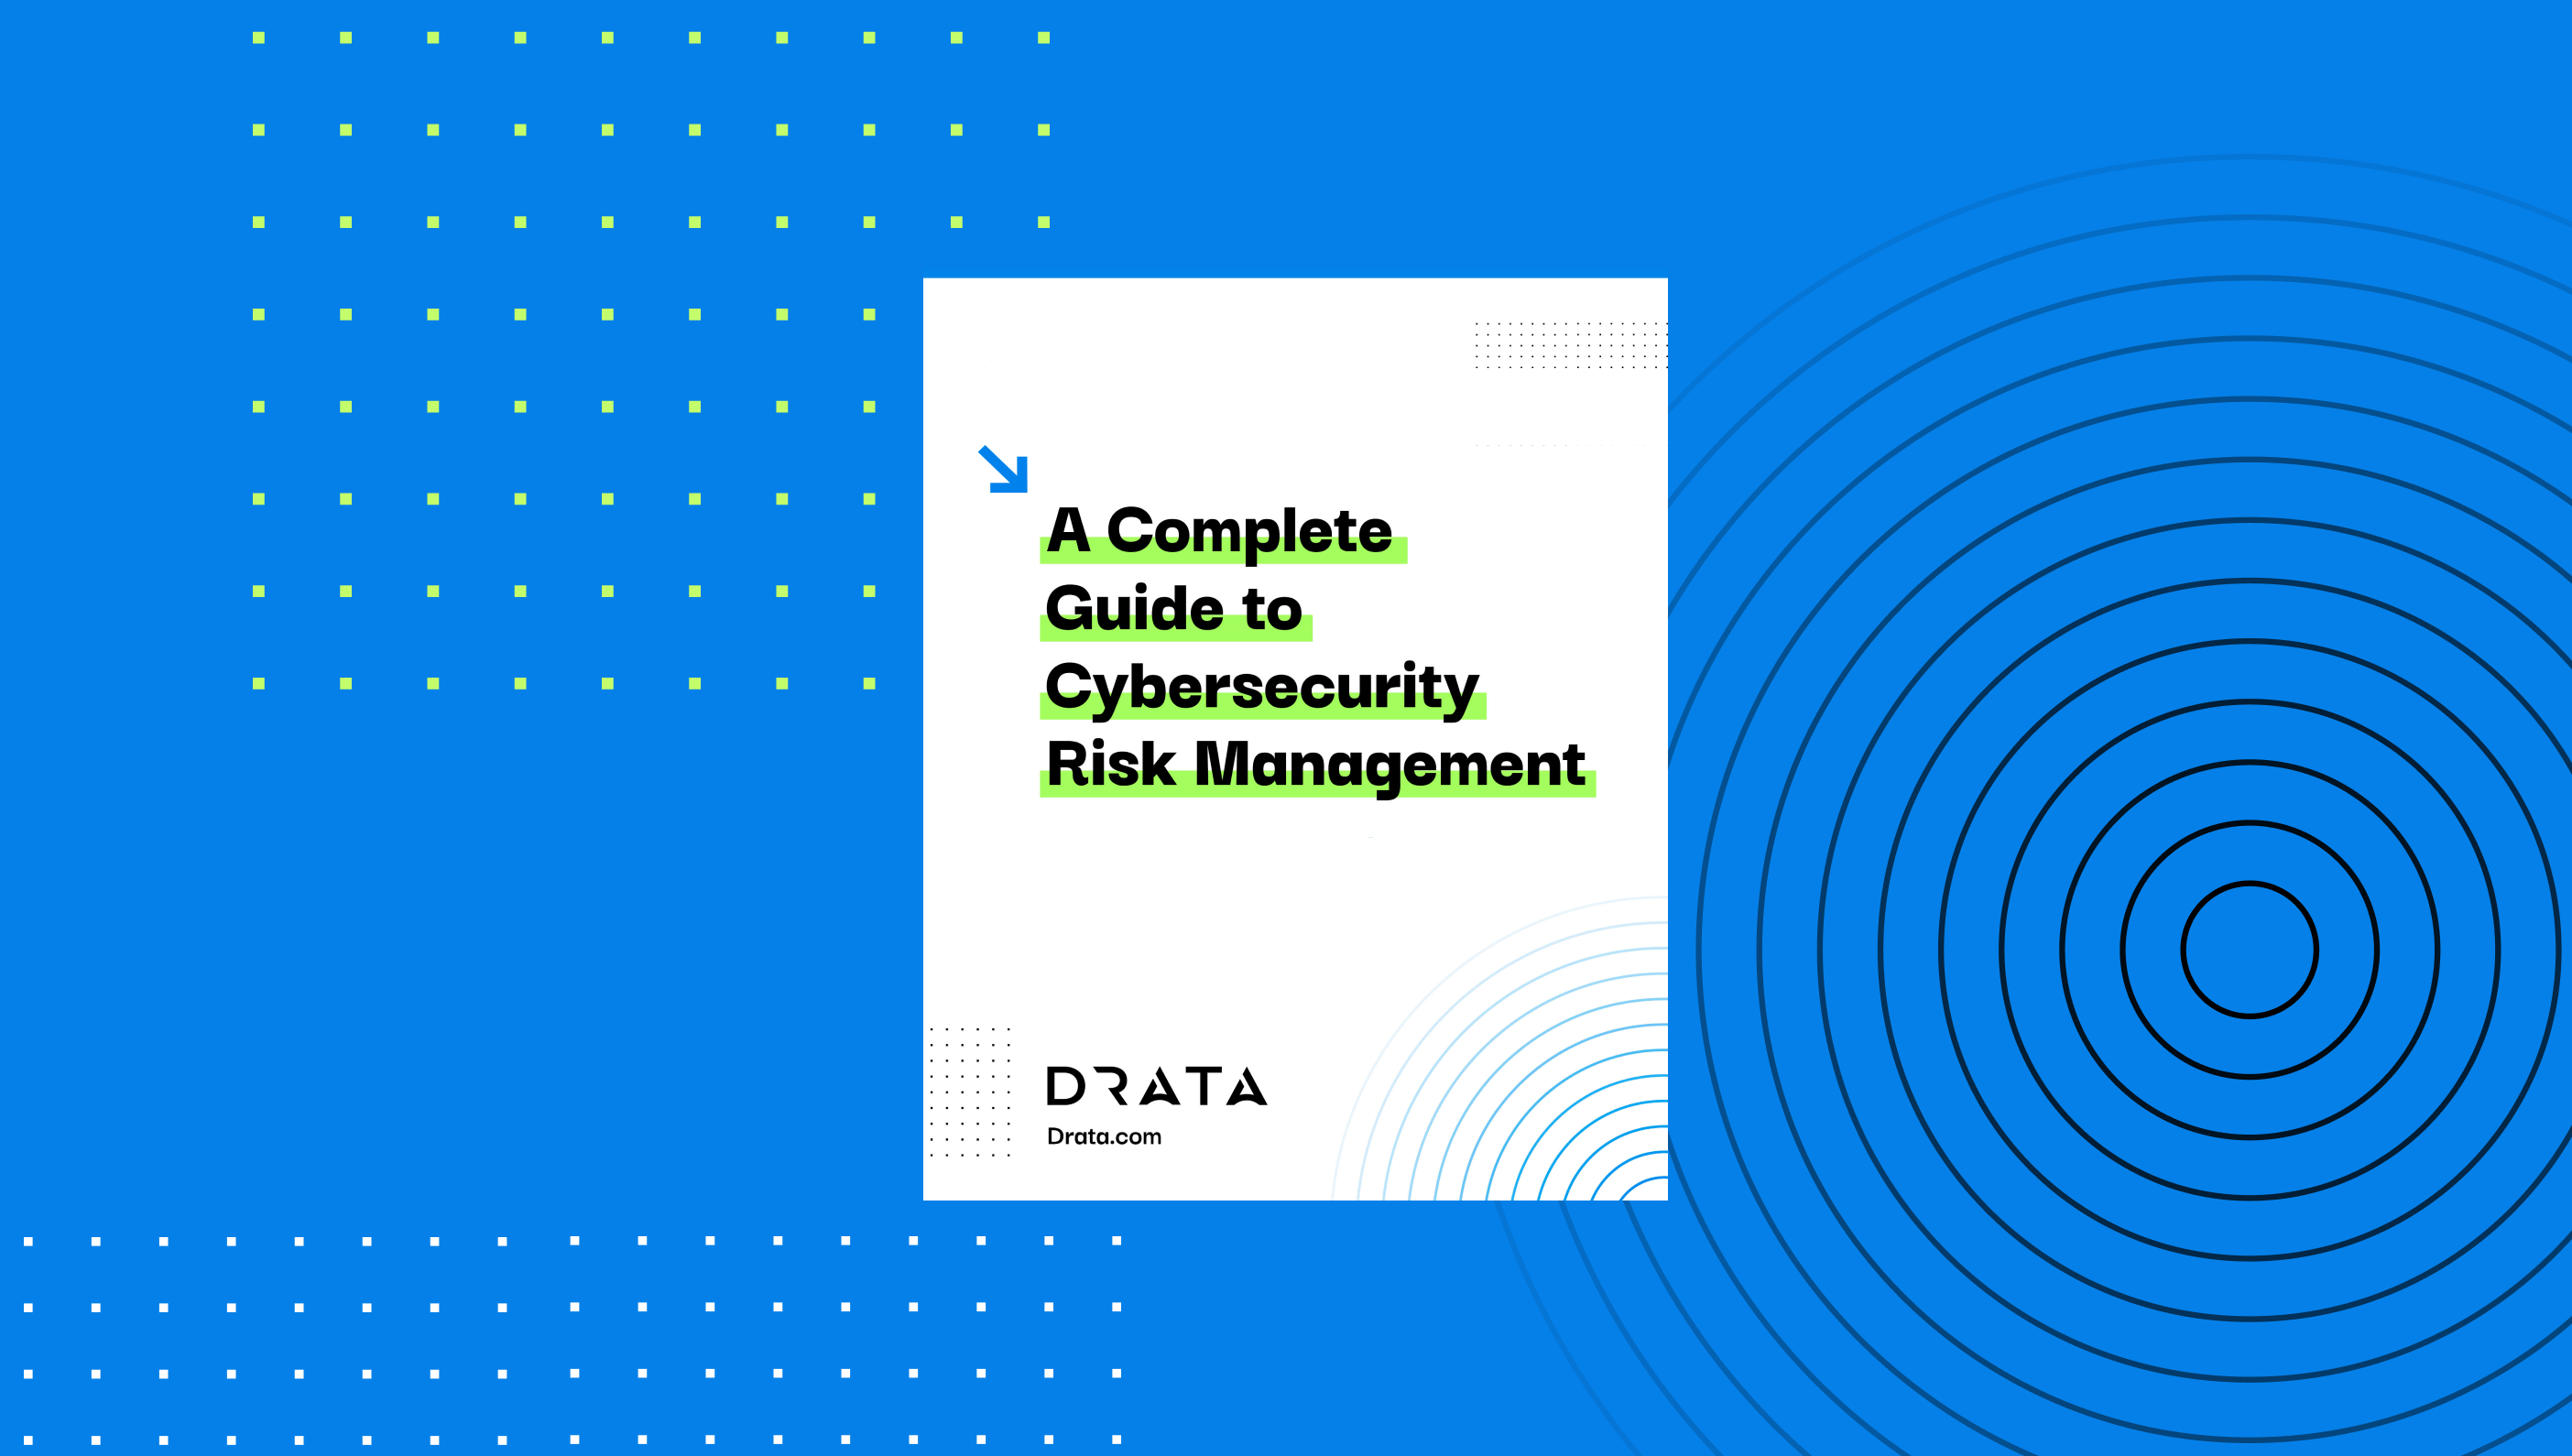 Drata A Complete Guide to Cybersecurity Risk Management (1)